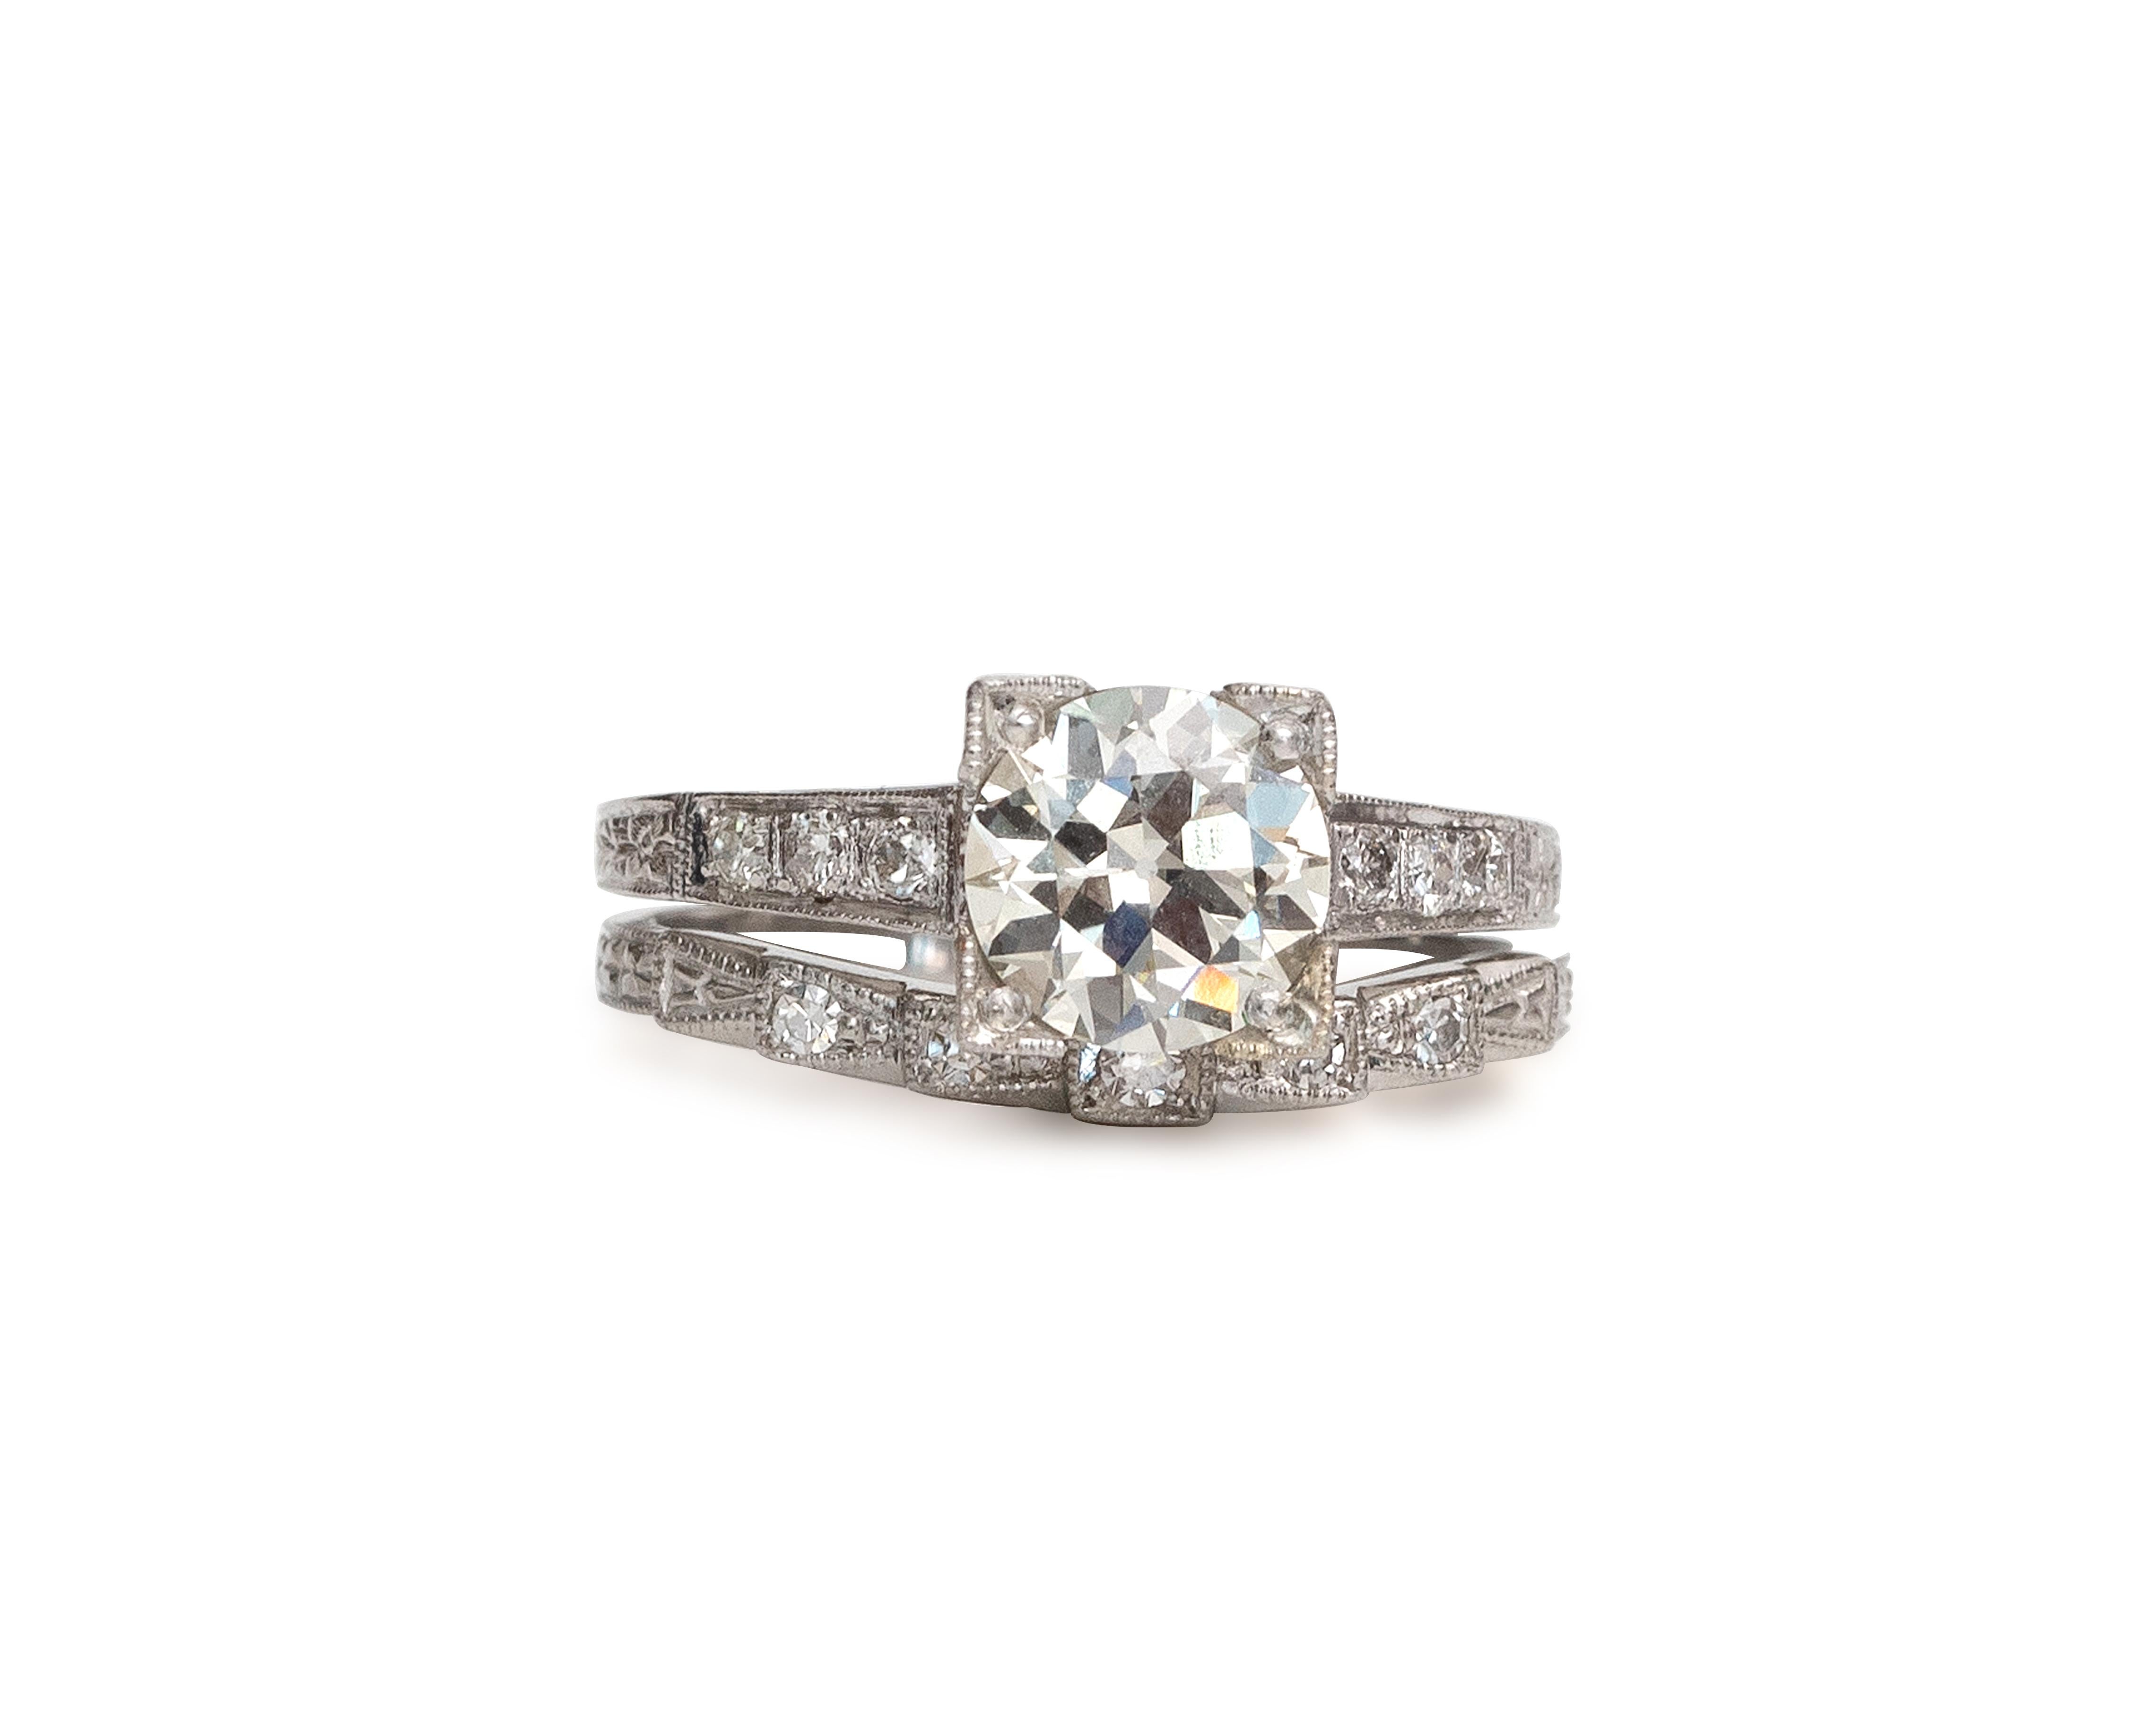 It is impossible not to catch eyes with this dazzling wedding set! The duo looks like a ring Jay Gatsby would give to Daisy! The platinum crafted wedding band displays .25 carats of accent diamonds, and the engagement ring is 1.42 carats of